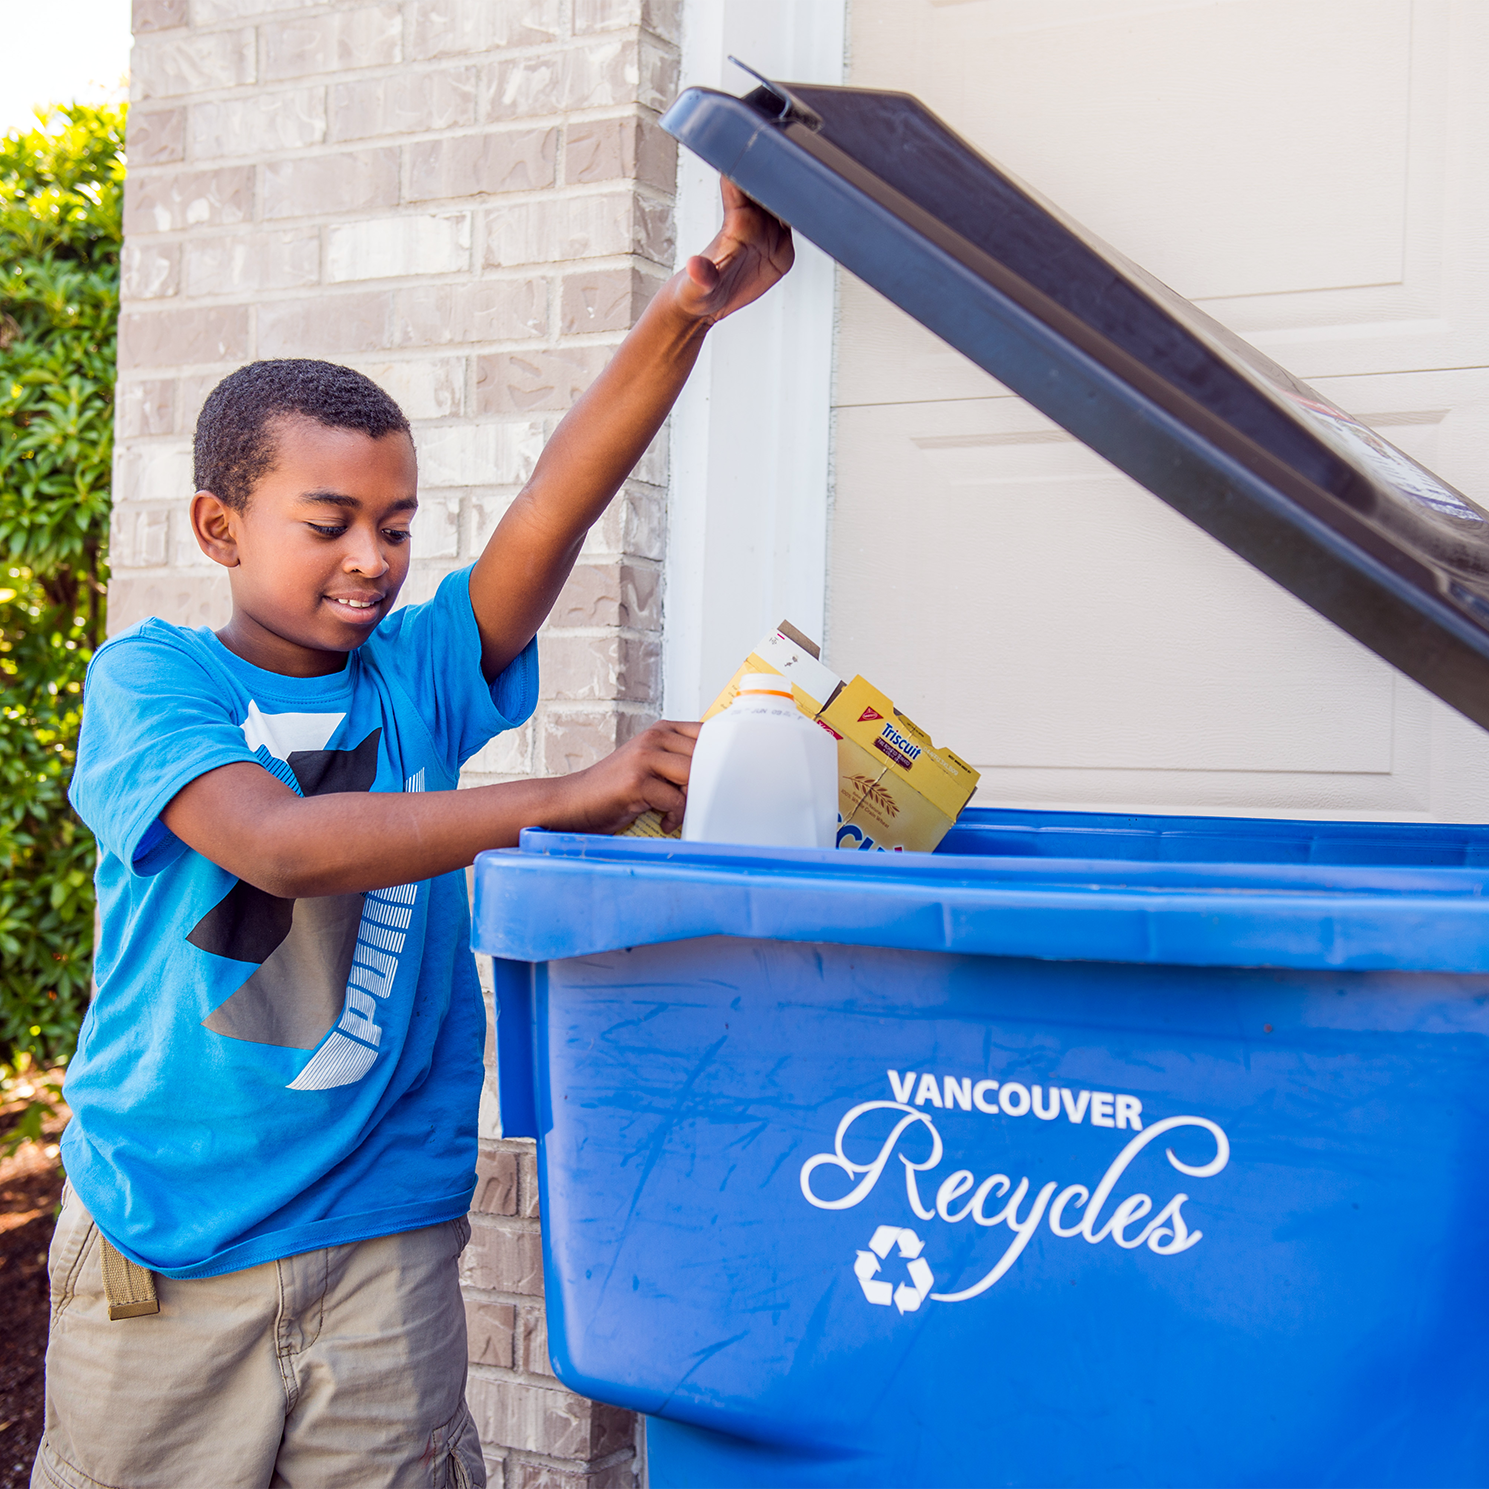 Tossing items into and recycle cart and recycling properly